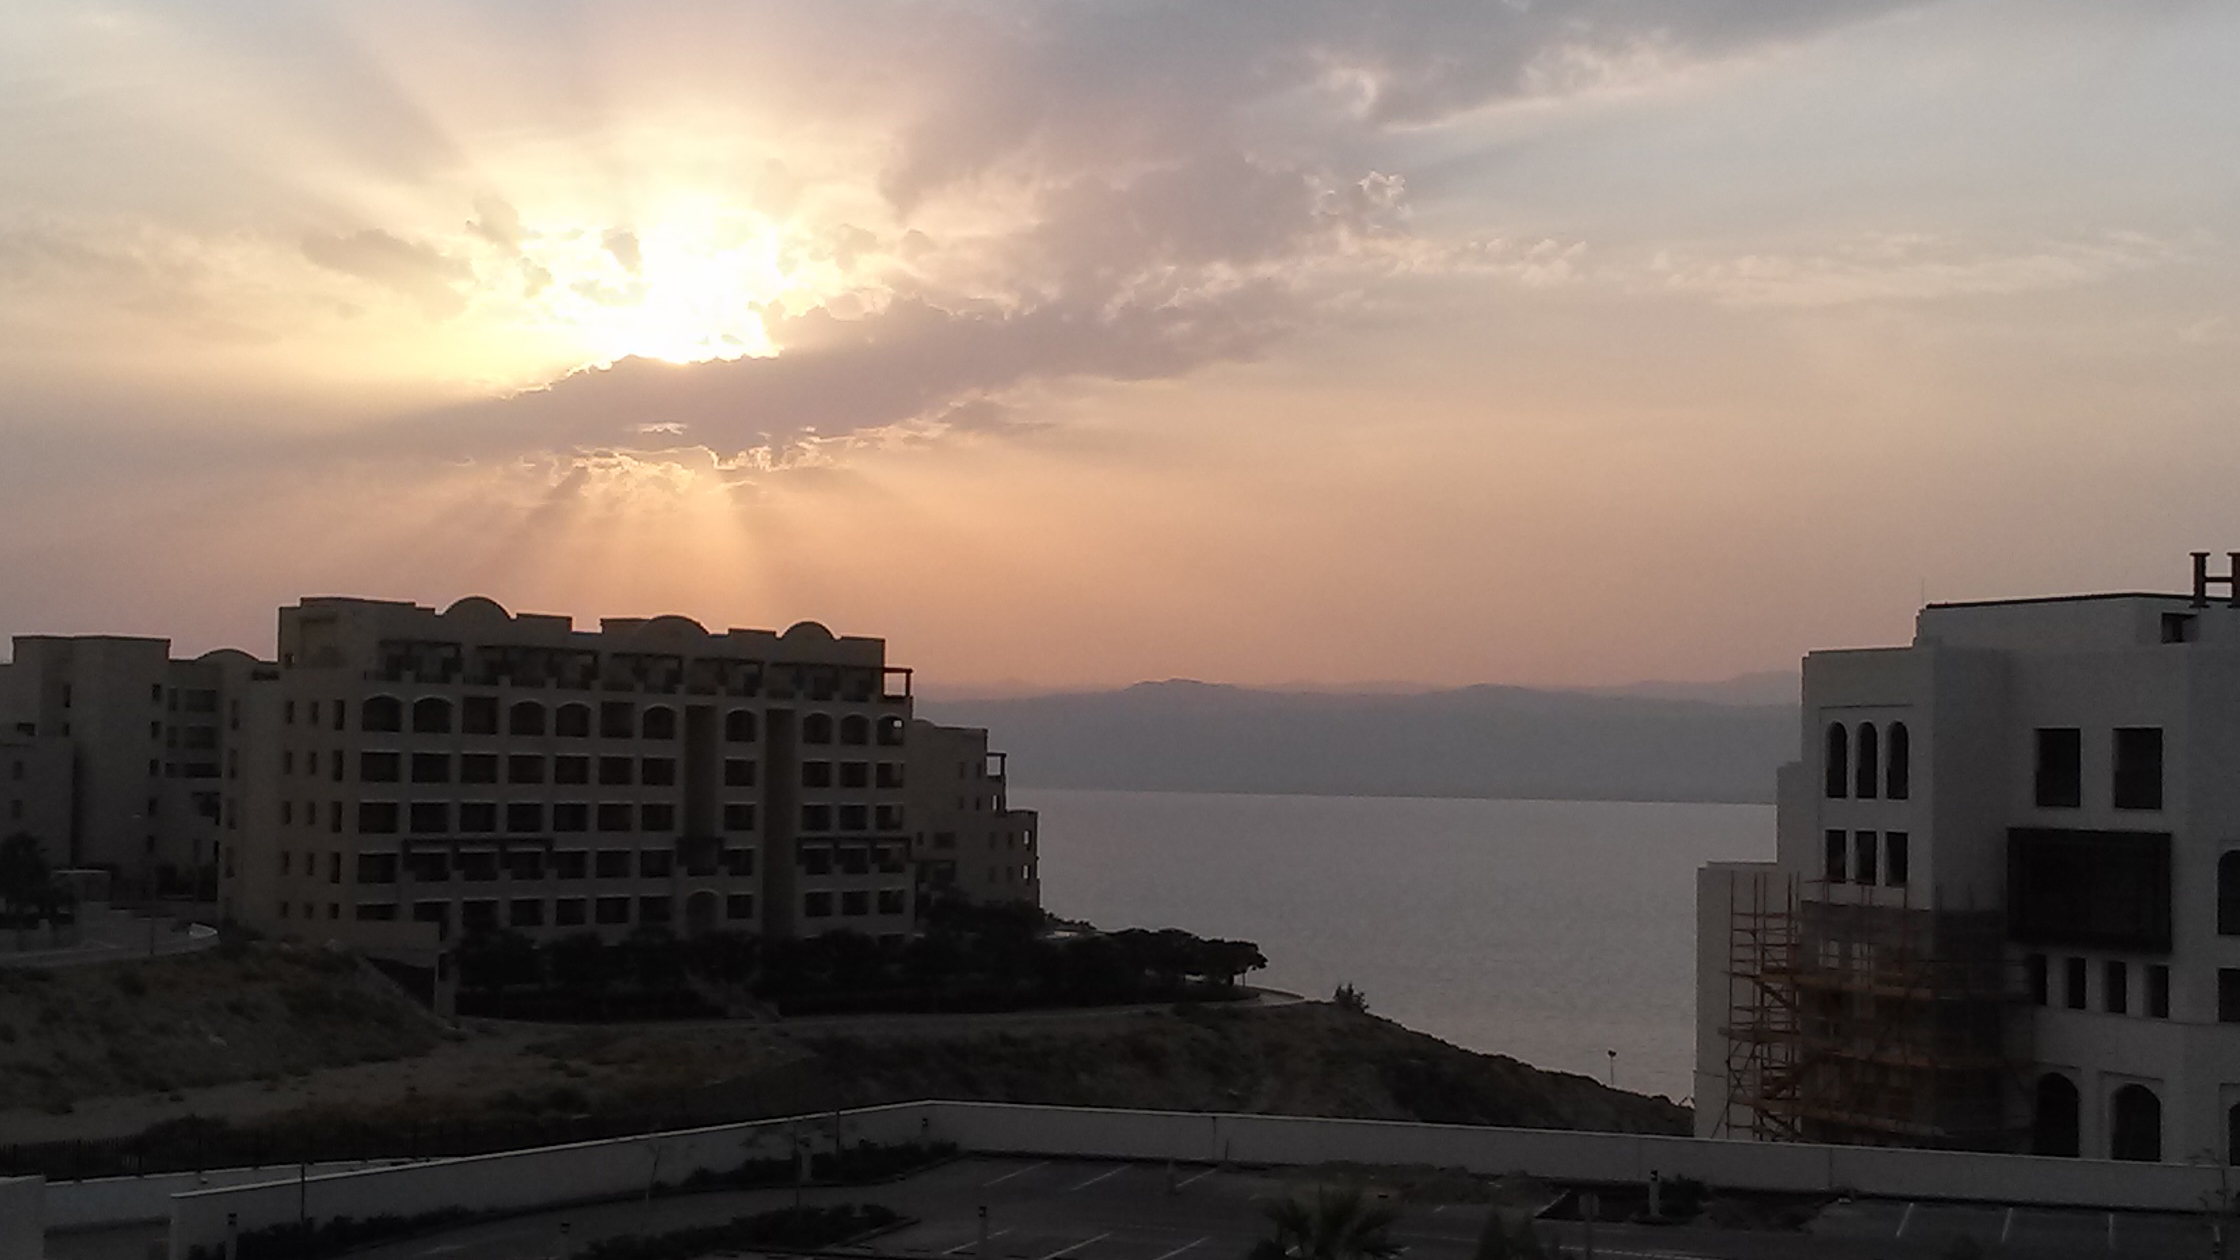 A view of the Dead Sea from Jordan. Photo © Rob McDonald